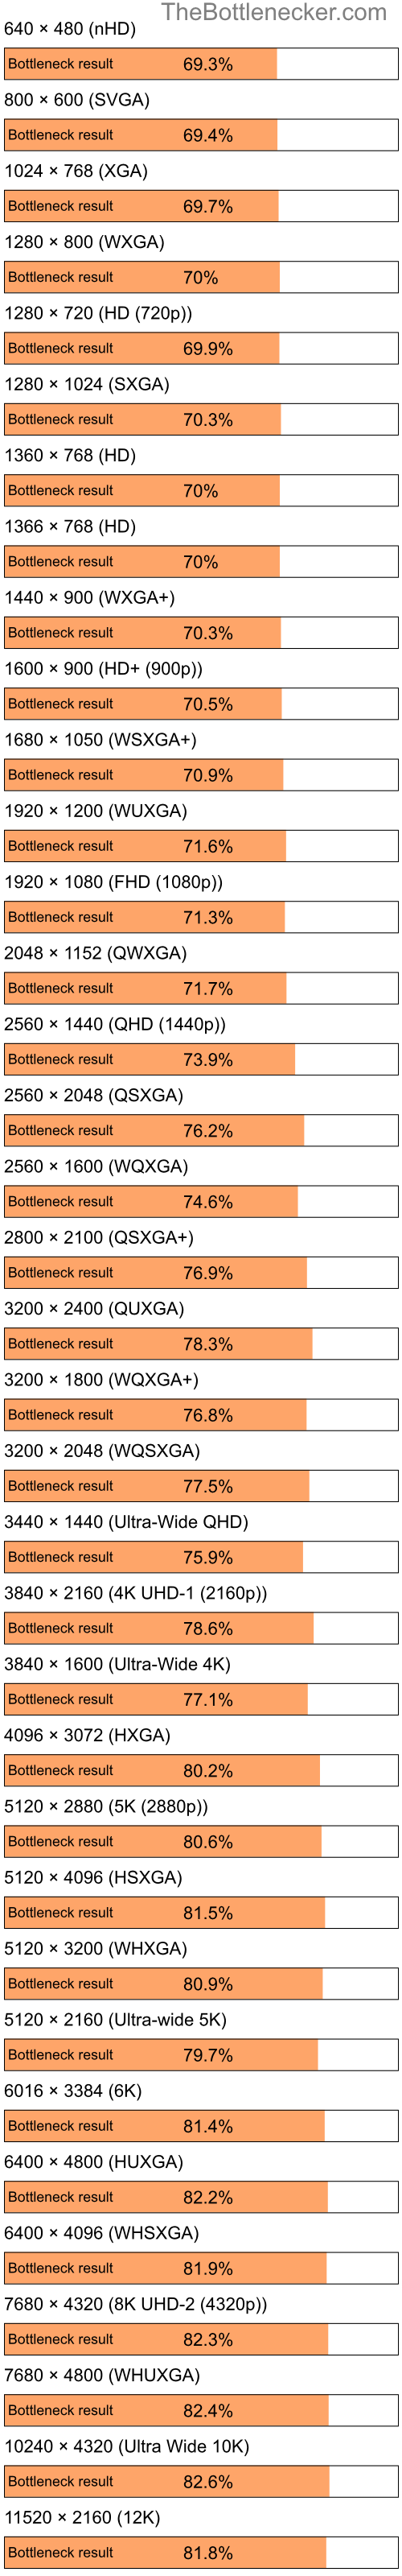 Bottleneck results by resolution for Intel Pentium 4 and AMD Radeon HD 4200 in Graphic Card Intense Tasks